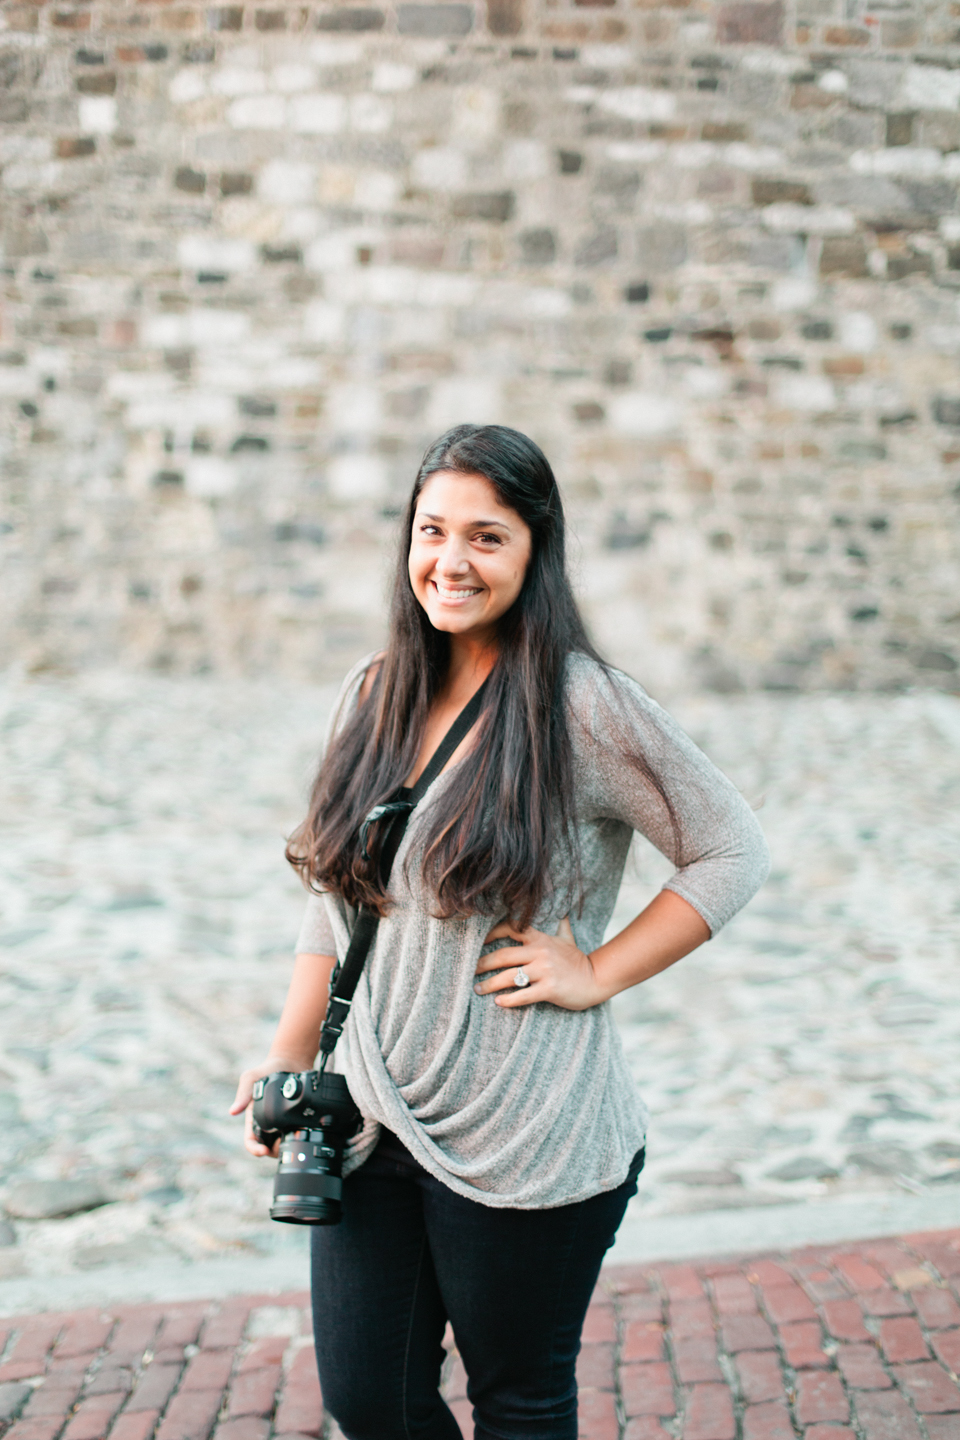 Picture of a female photographer in historic downtown Savannah, Georgia.  She is wearing a grey shirt, black pants, and is holding a Canon camera.  This is Rana of Roohi Photography.